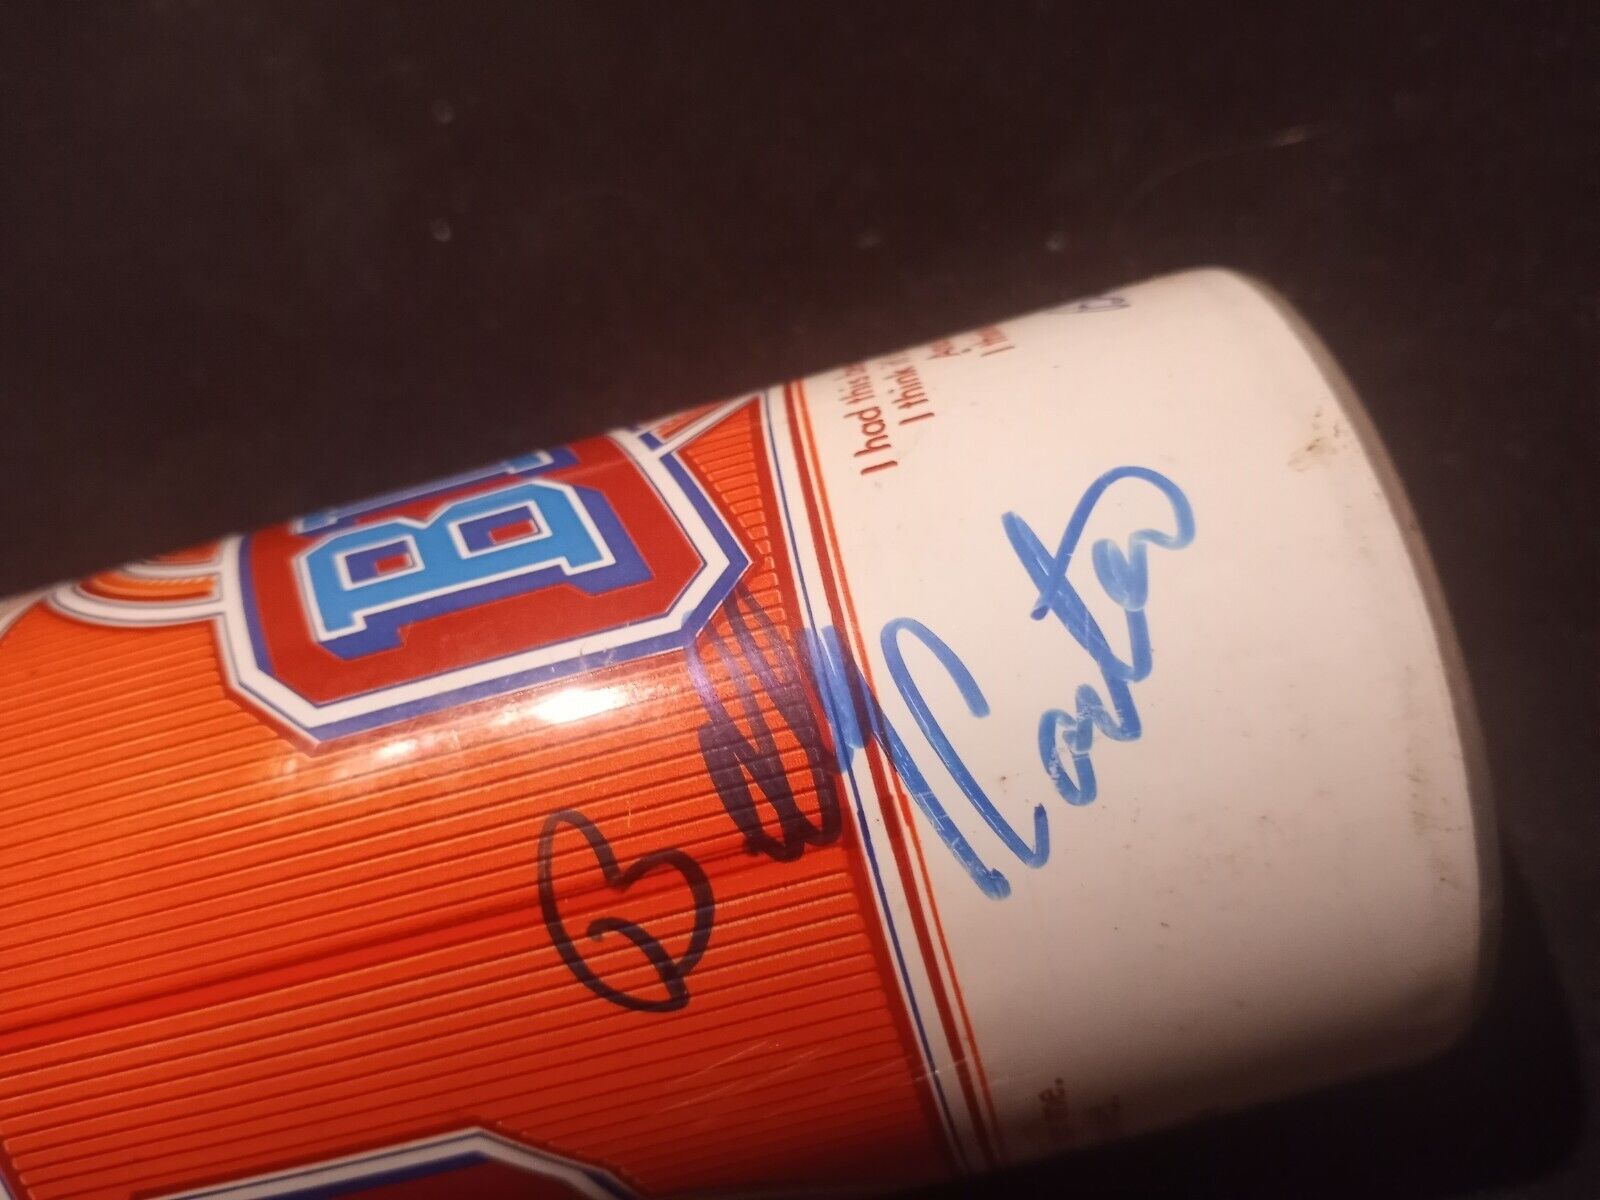 Super Rare Billy Beer Can Signed By Billy Carter GOT This Since I Was A Kid ++